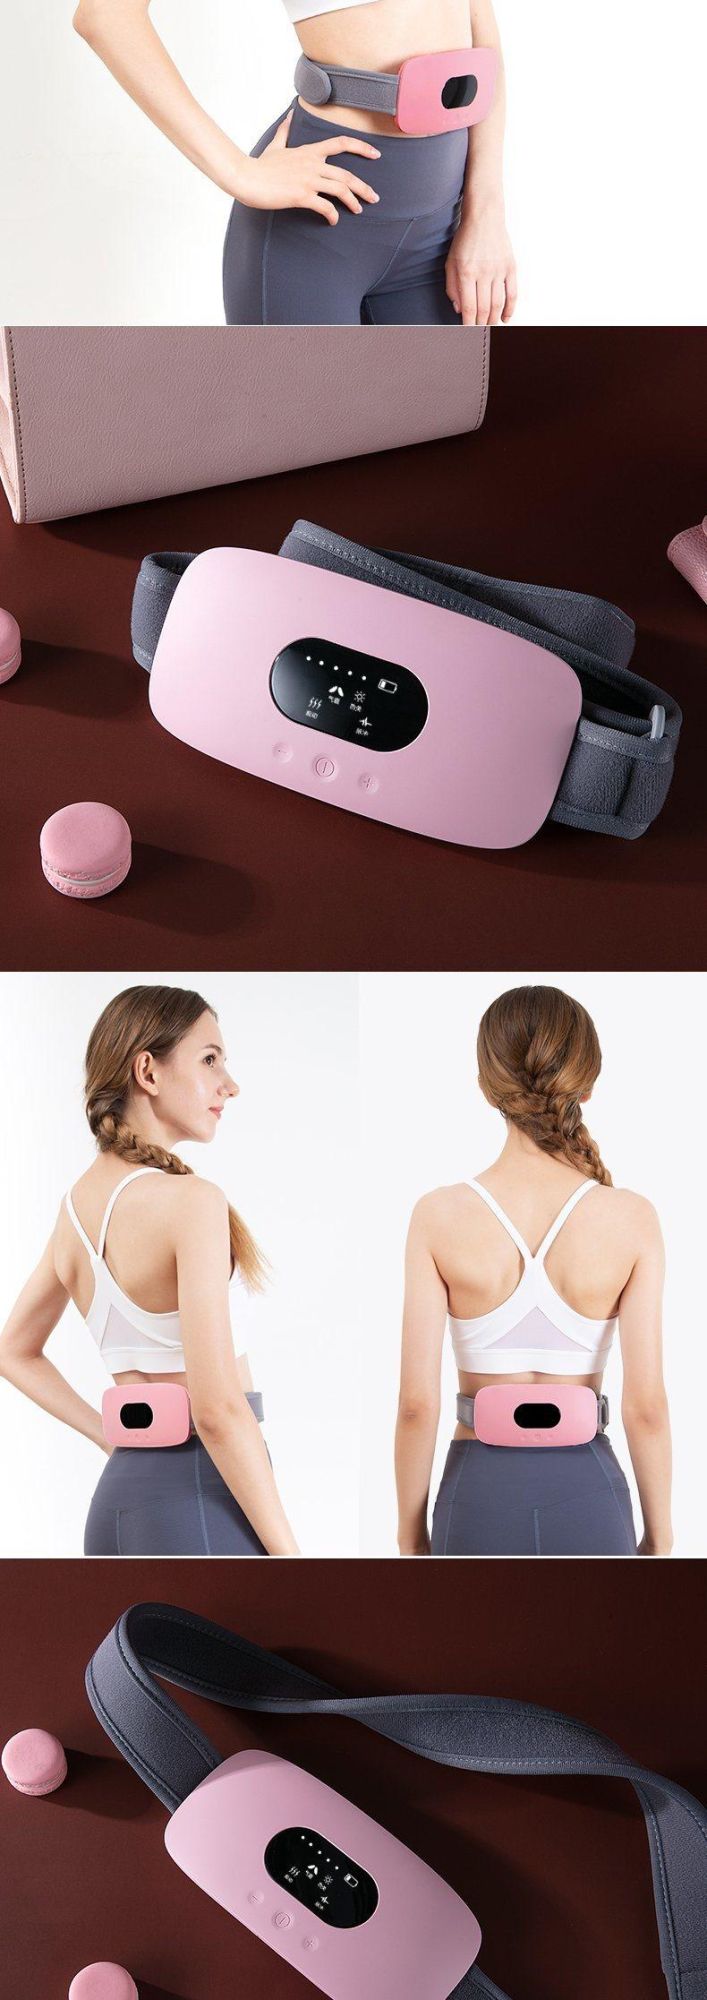 Hezheng EMS Pulse Heating Abdominal with Vibration and Air Pressure Belly Massager